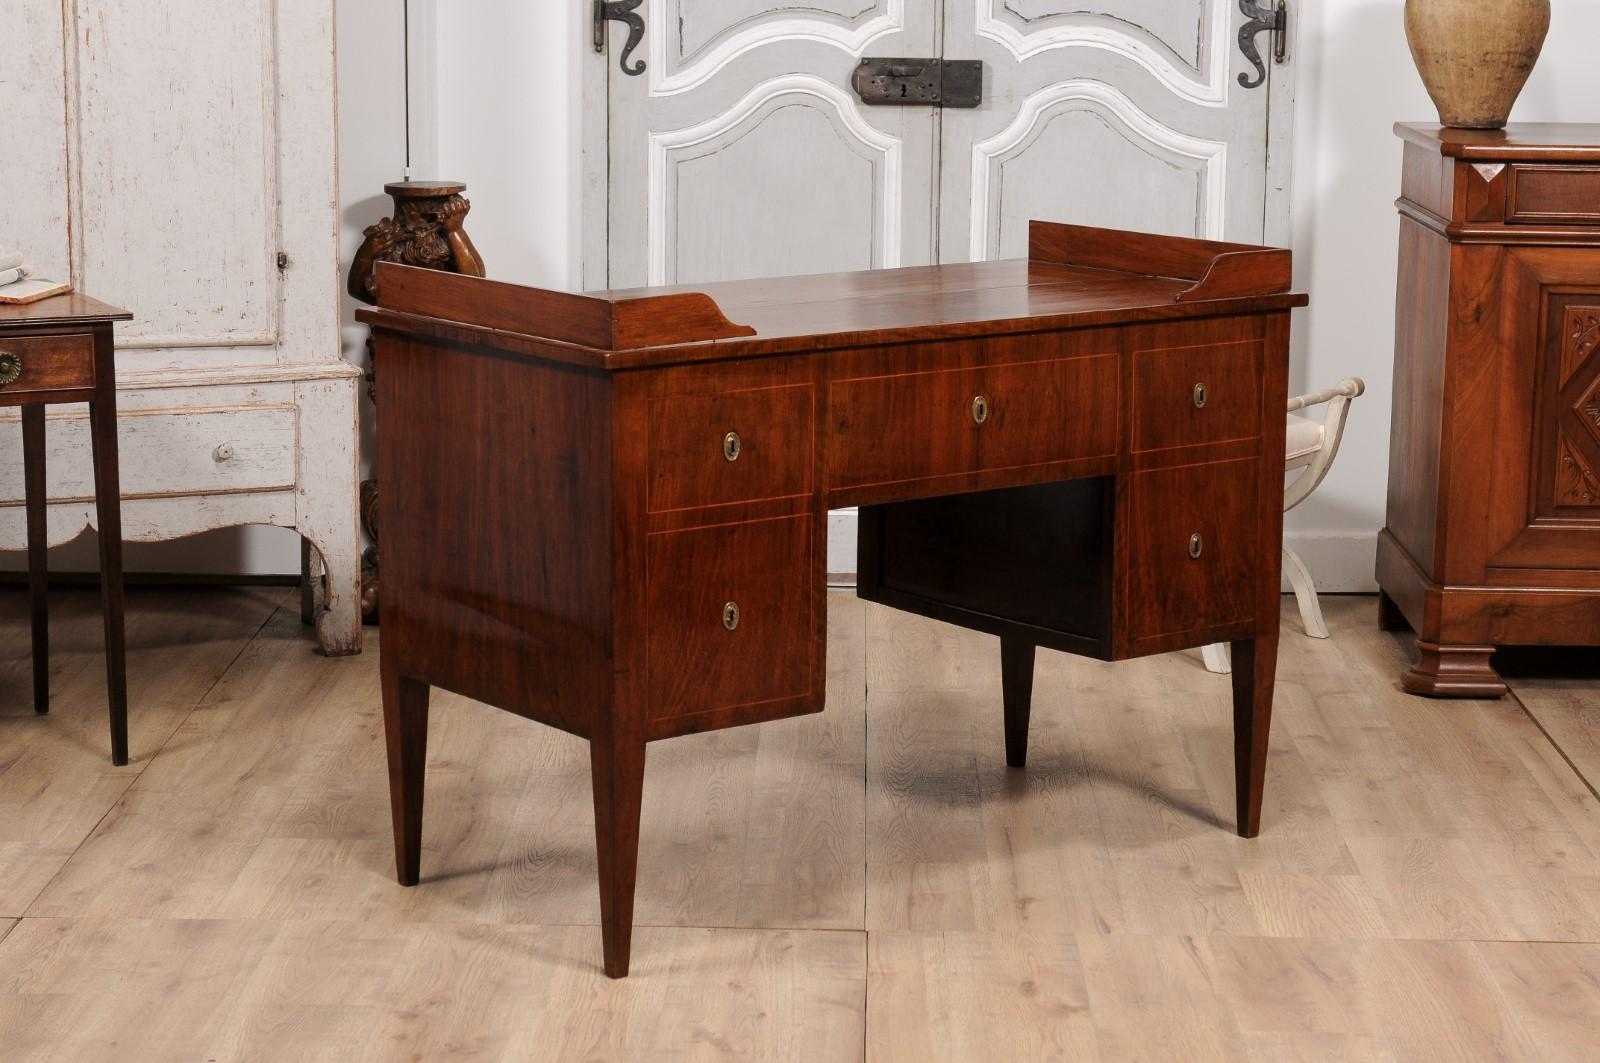 Italian 1820s Walnut and Mahogany Desk with Five Drawers, Pull-out and Banding For Sale 5